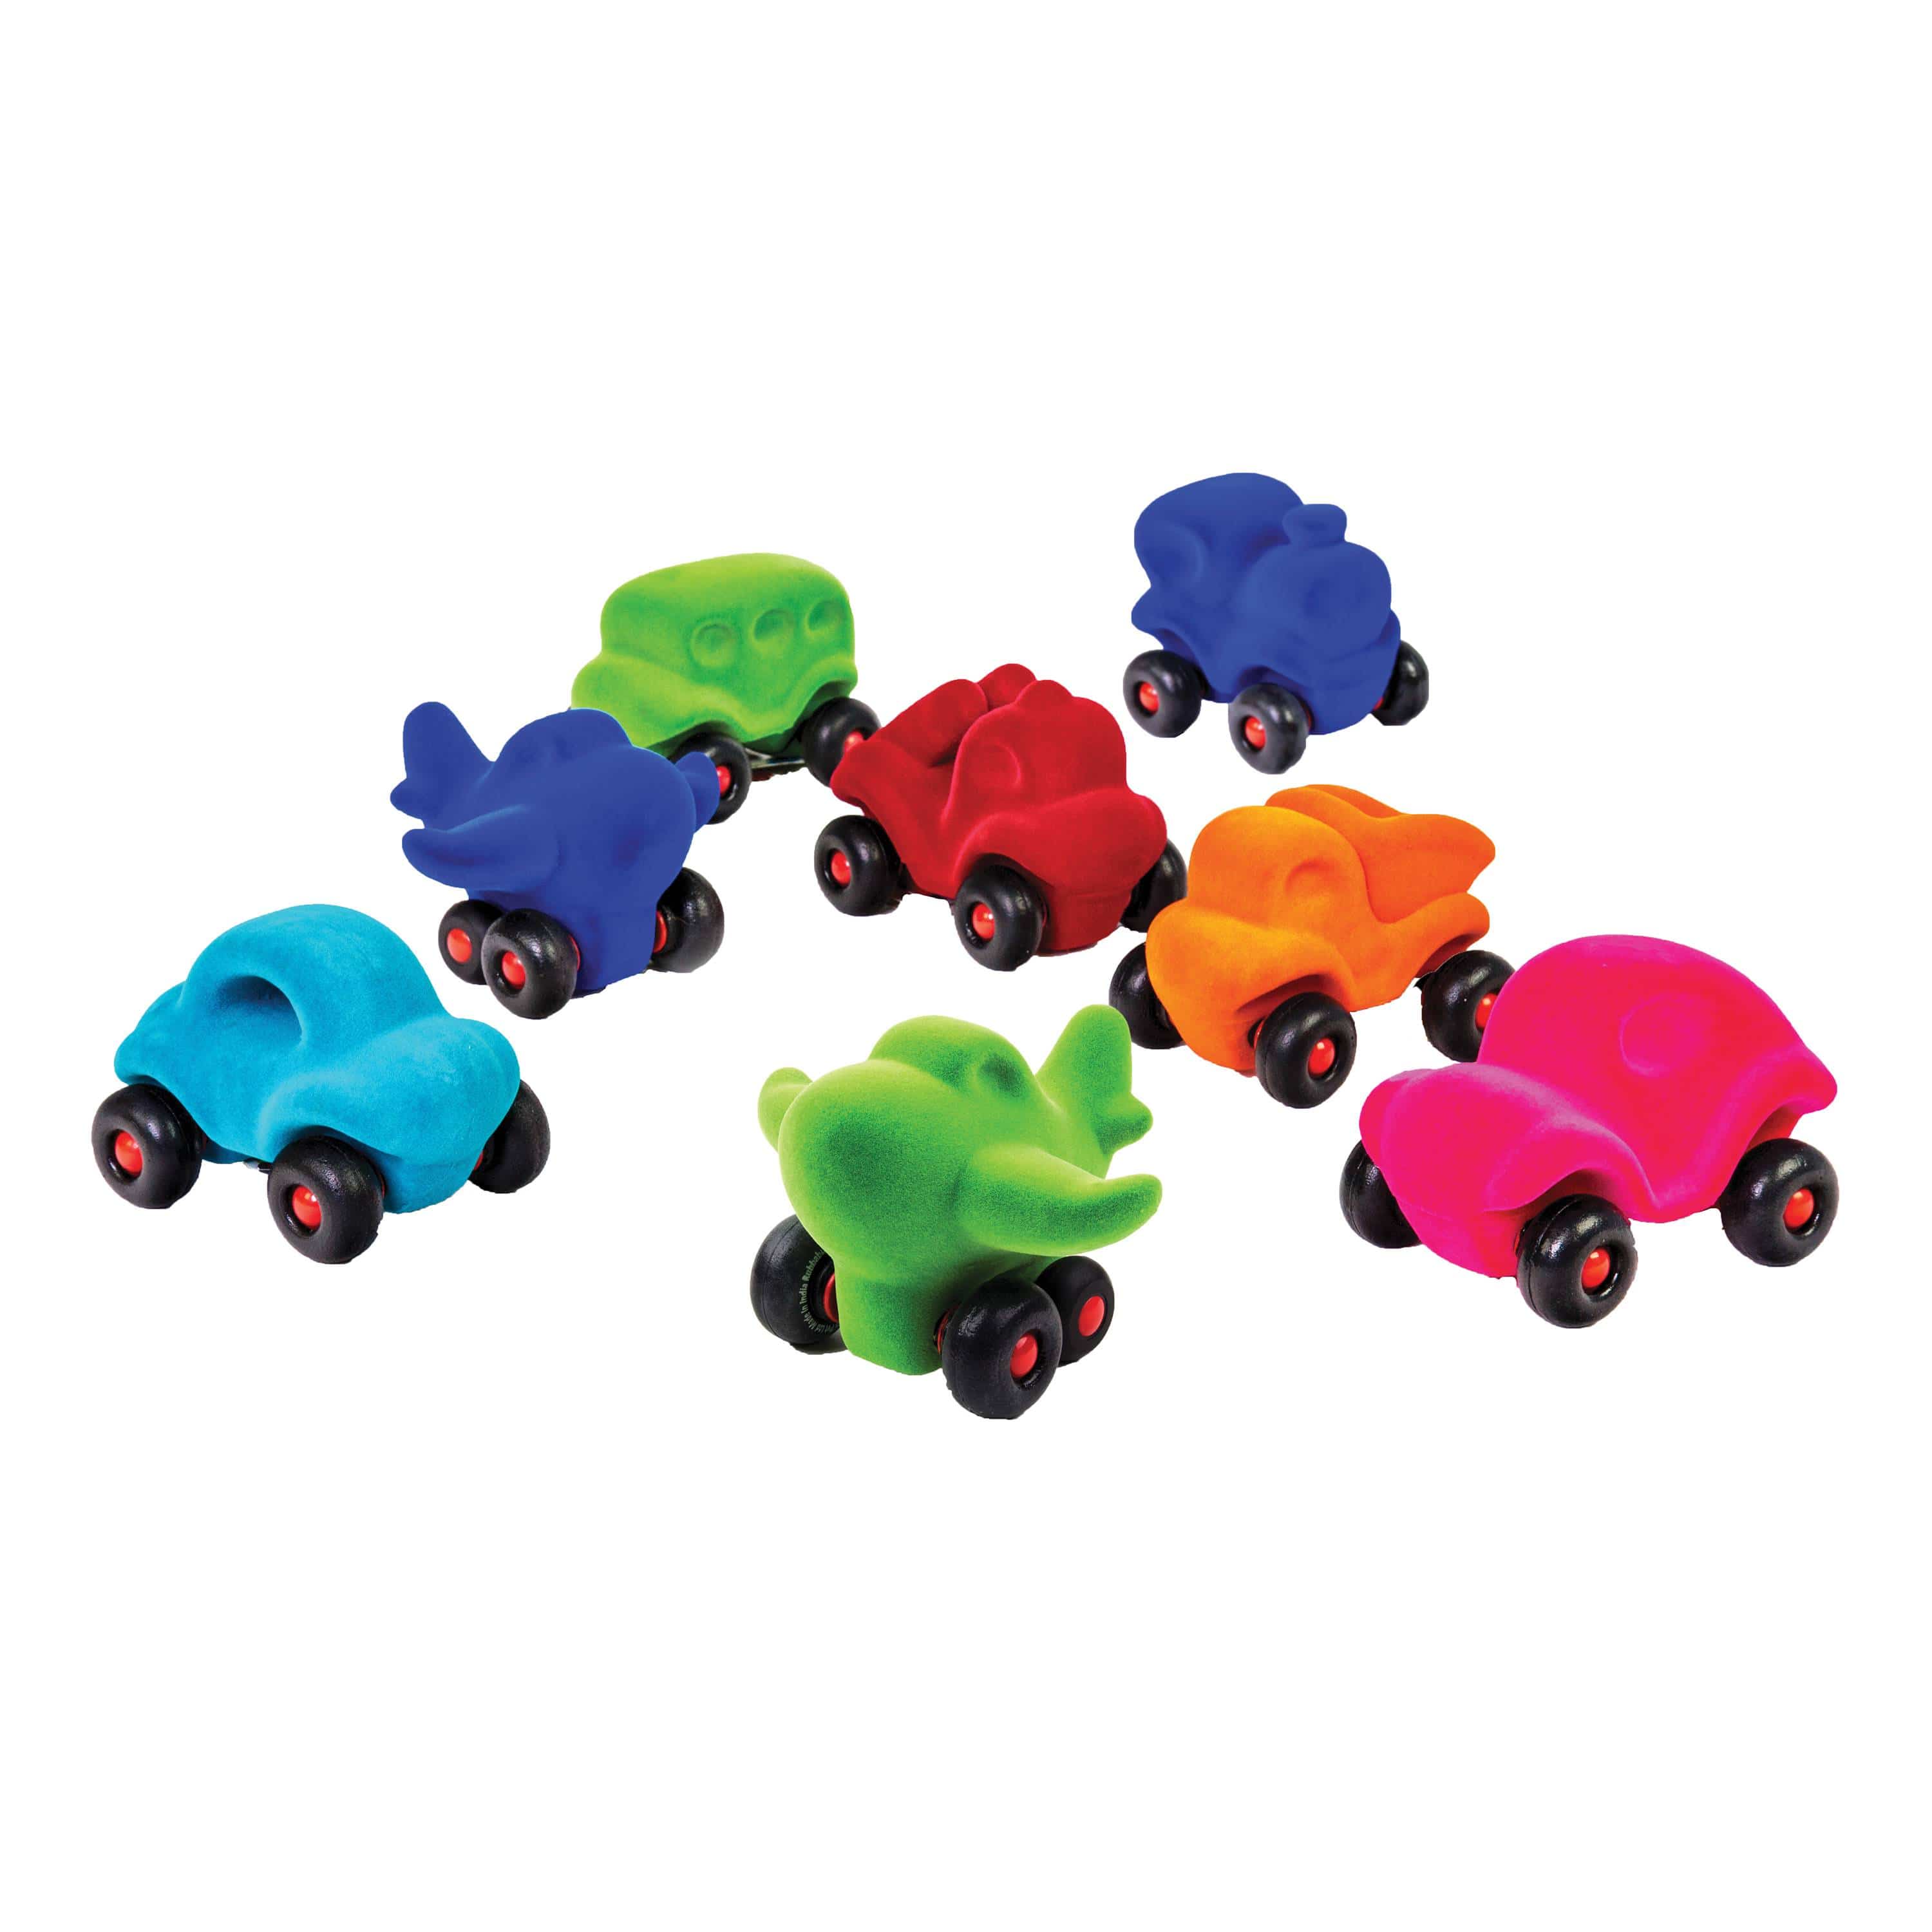 US Toy Company/Constructive Playthings US Toy Company Rubbabu® Little Vehicle - Little Miss Muffin Children & Home